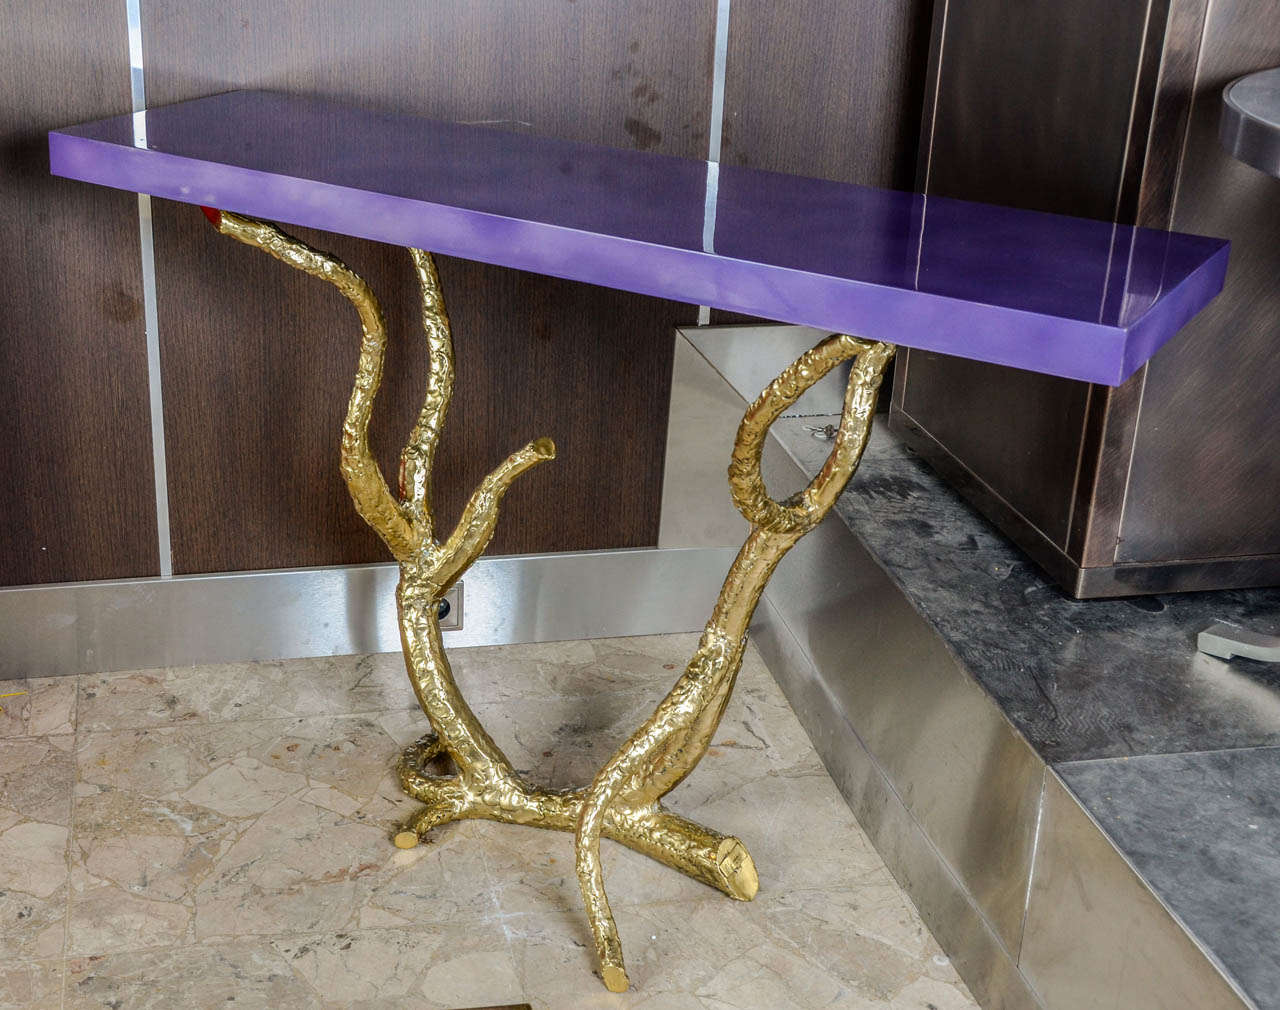 1970's Brass sculptural console 
Signed